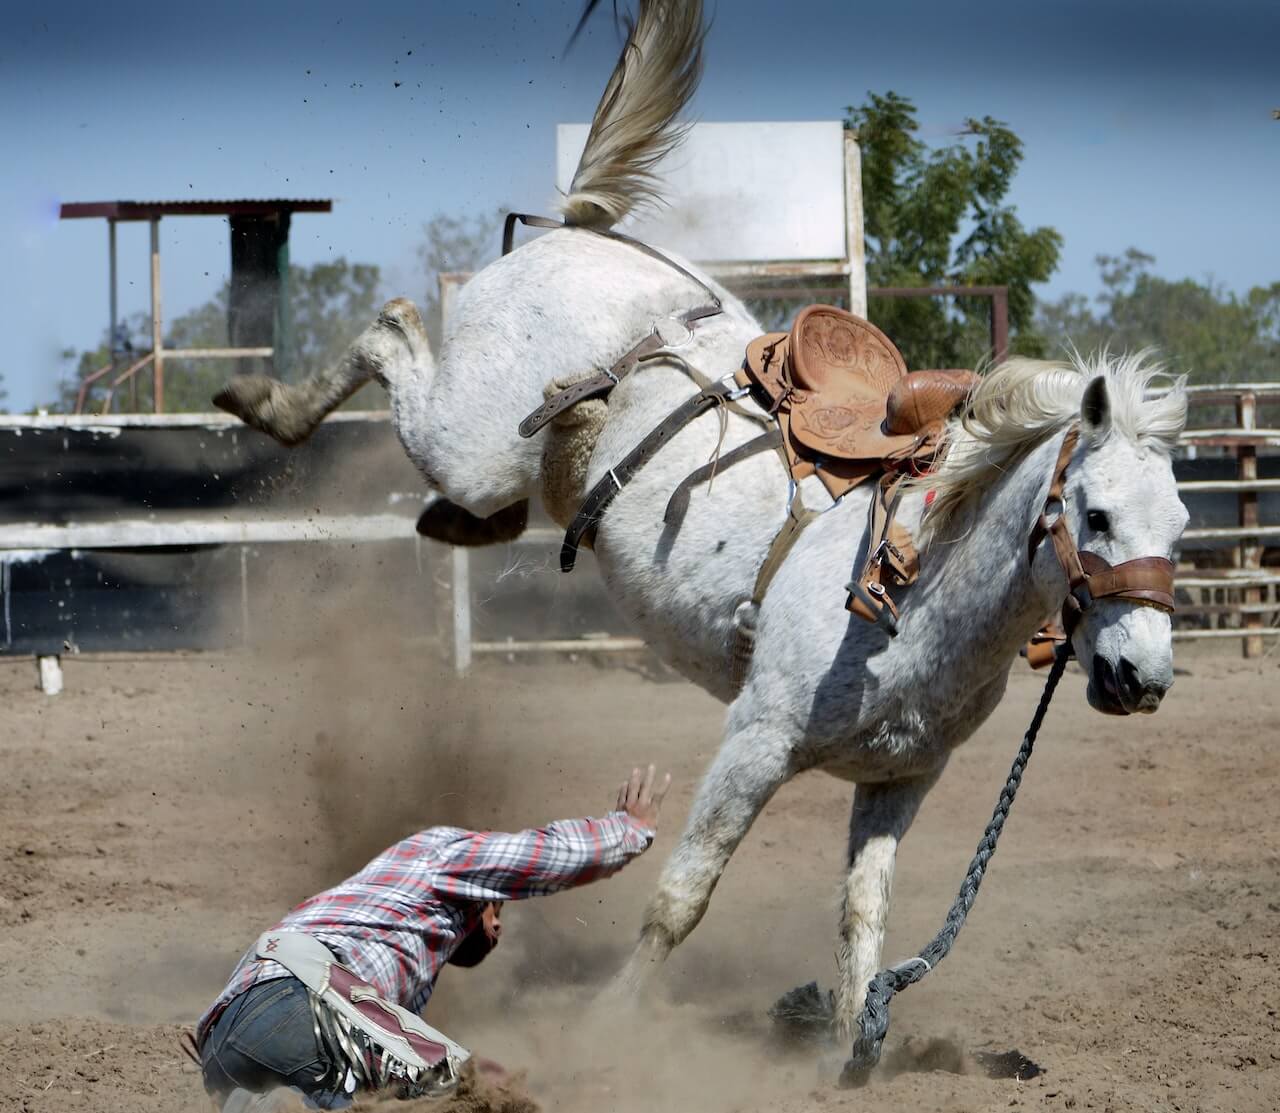 10 Most Common Ways To Get Hurt By A Horse